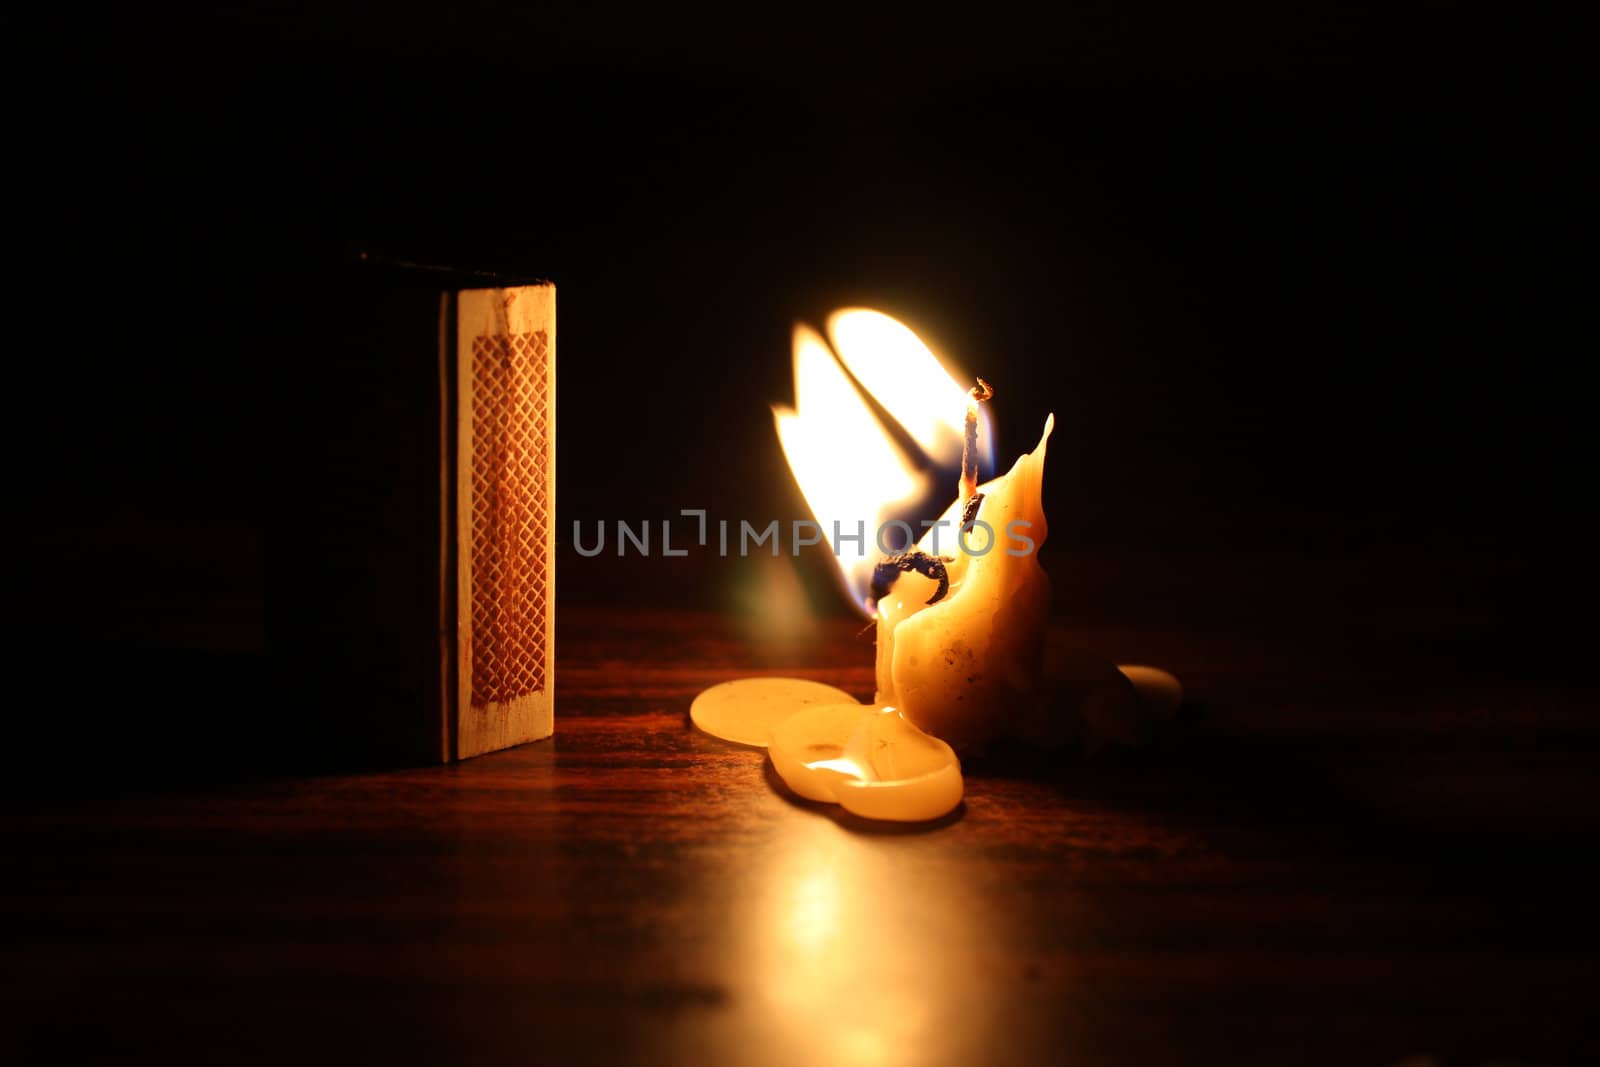 A metaphorical image showing a burning candle almost about to end, depicting time running out.